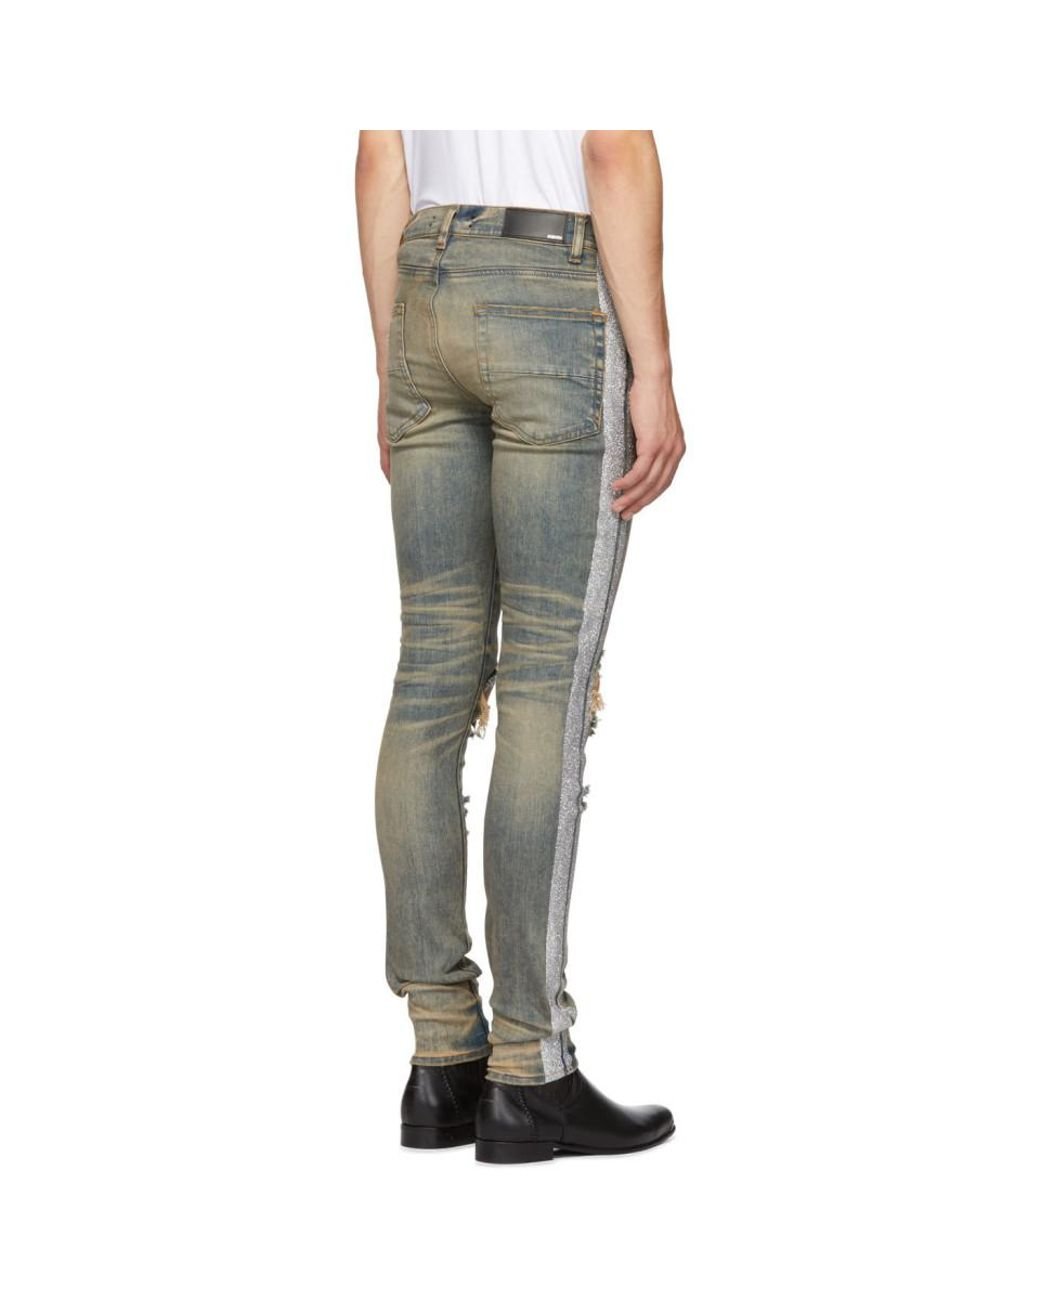 Fashion Jeans Skinny Jeans Expresso Skinny Jeans grey-silver-colored glittery 